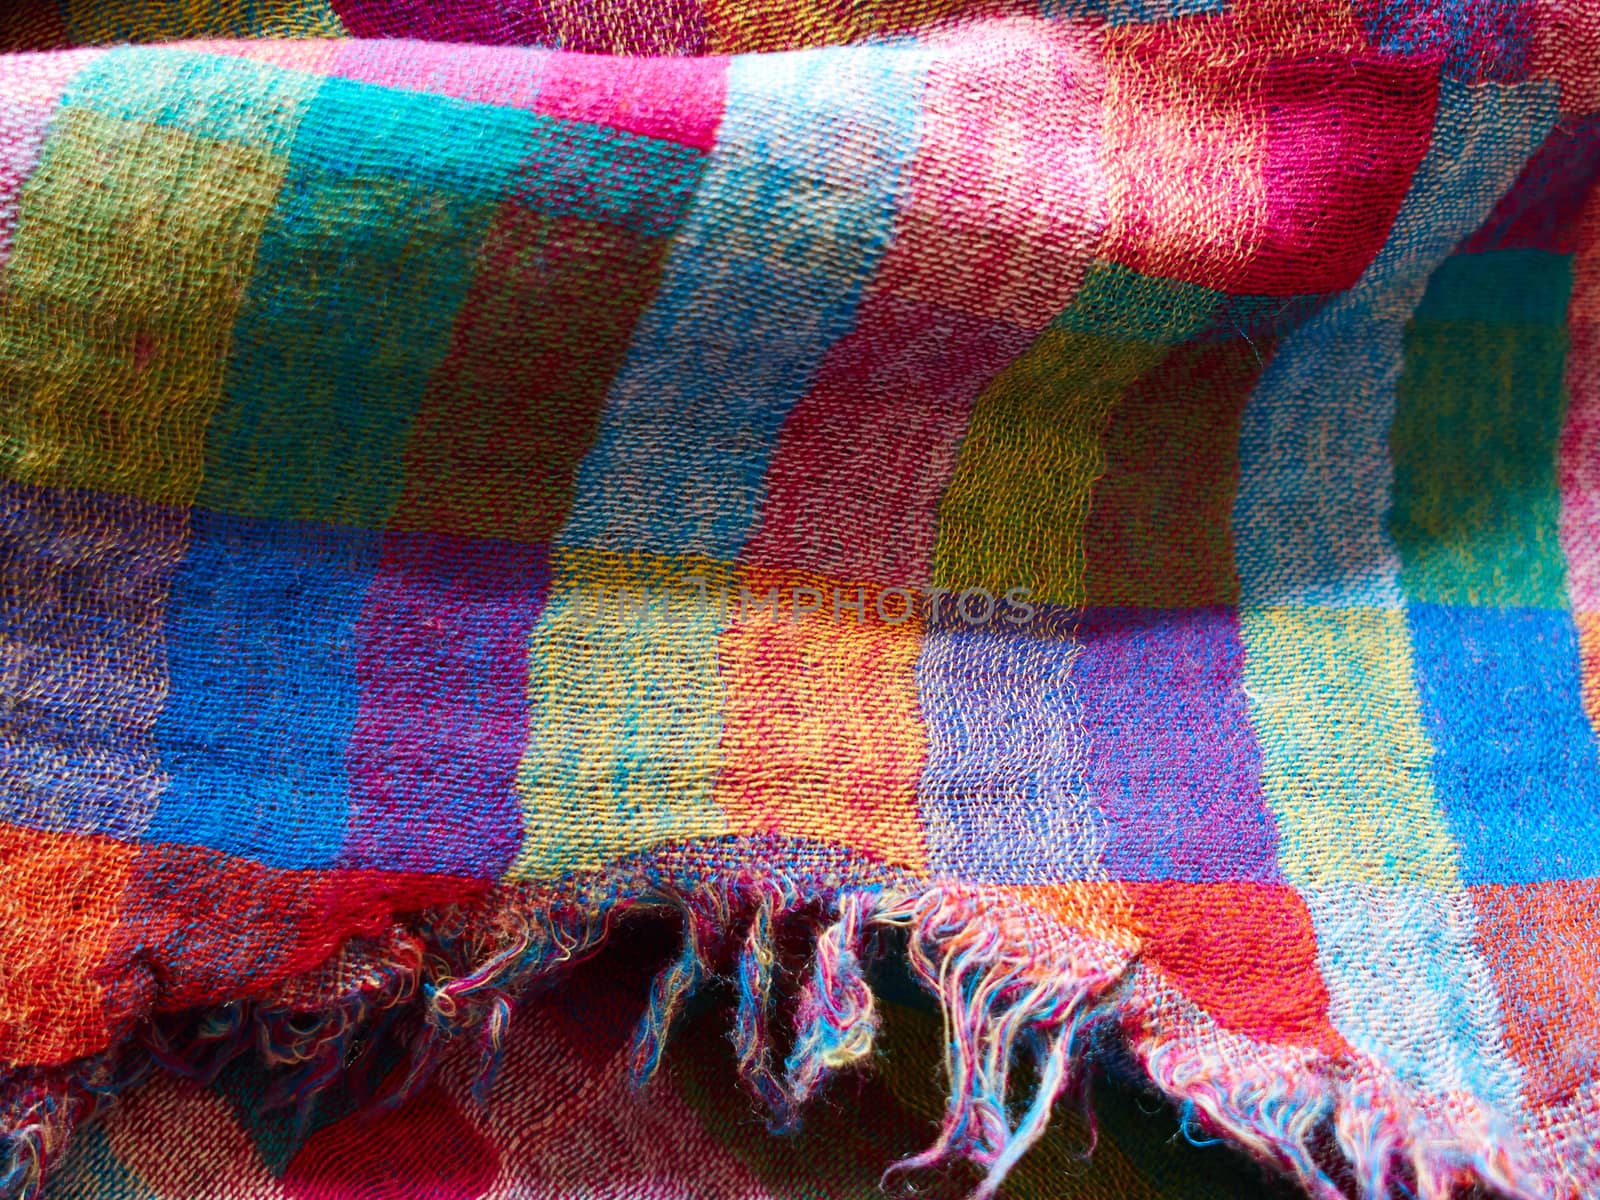 Colorful ethnic hand woven fabric material cloth on display in a market